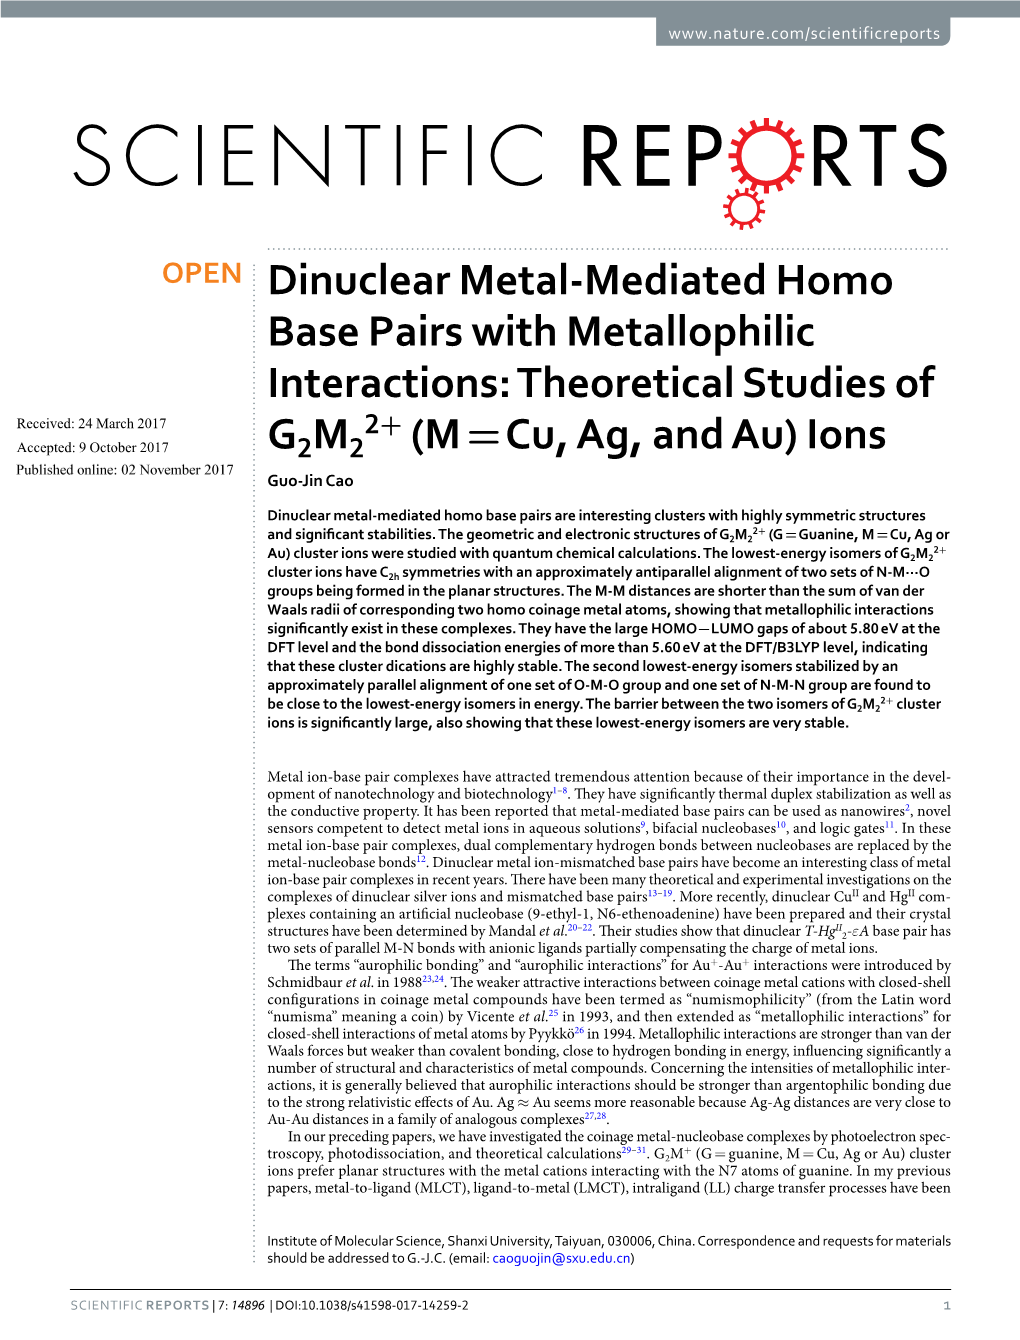 Dinuclear Metal-Mediated Homo Base Pairs with Metallophilic